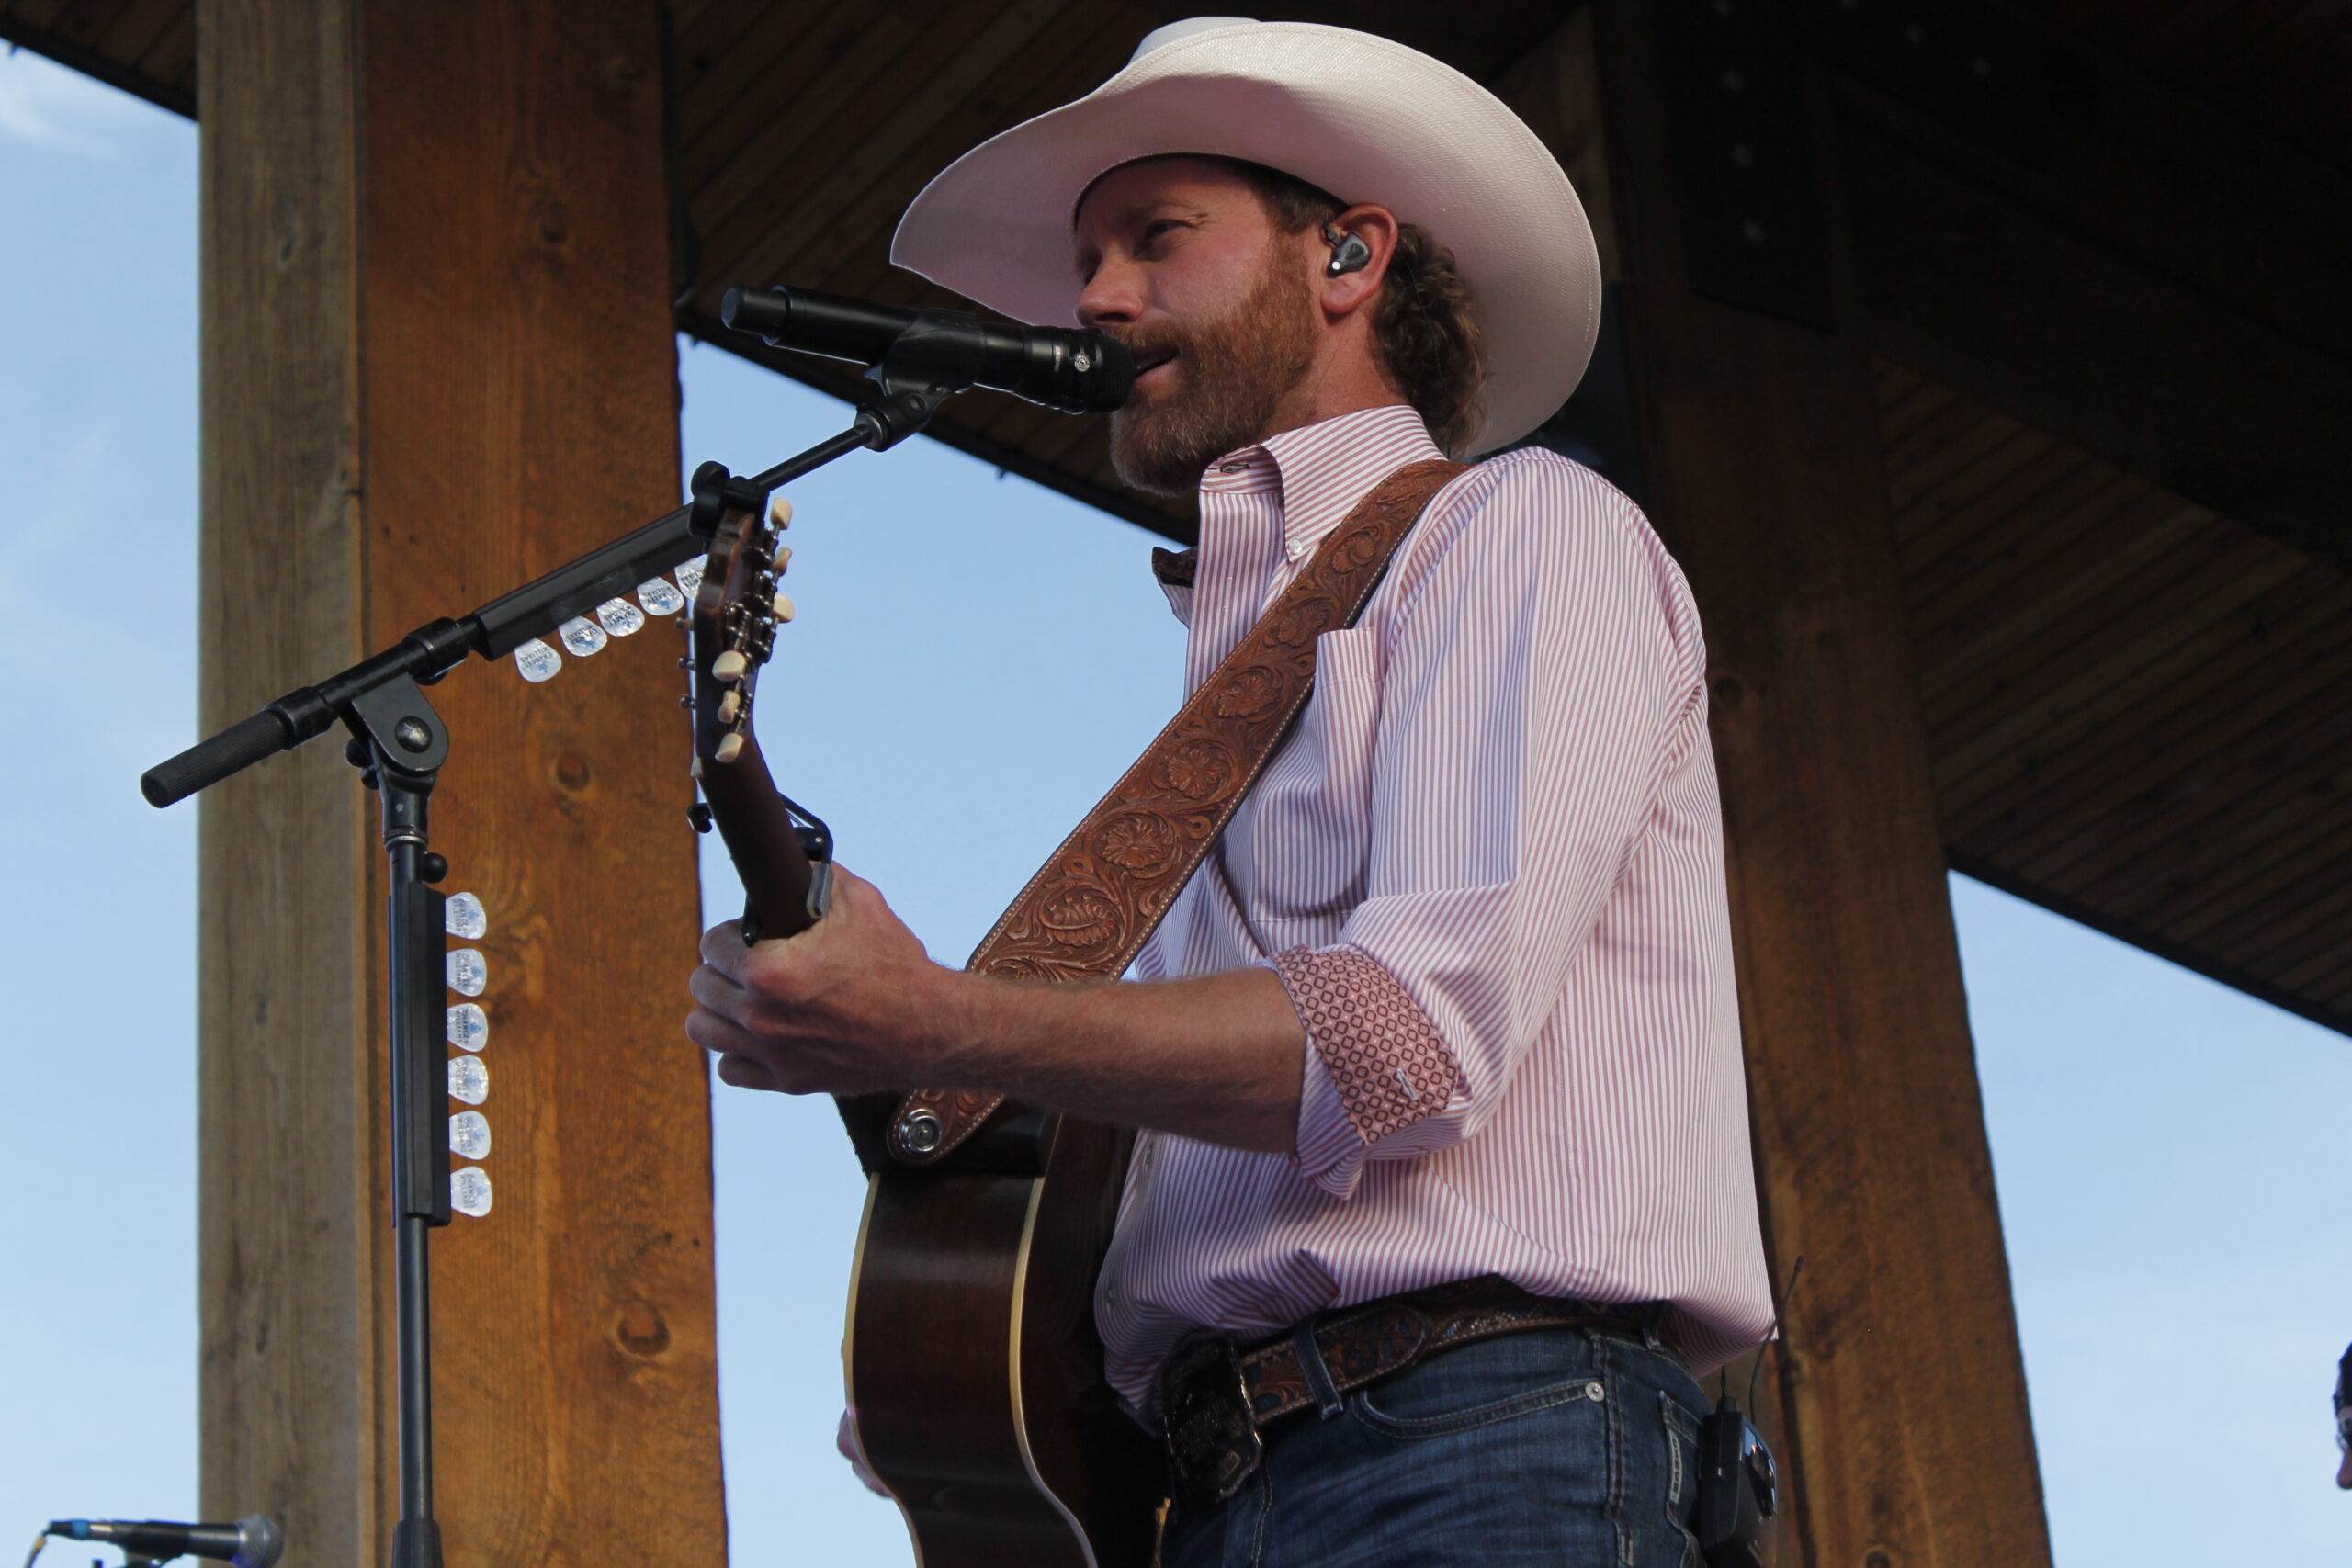 Chancey Williams performs onstage.